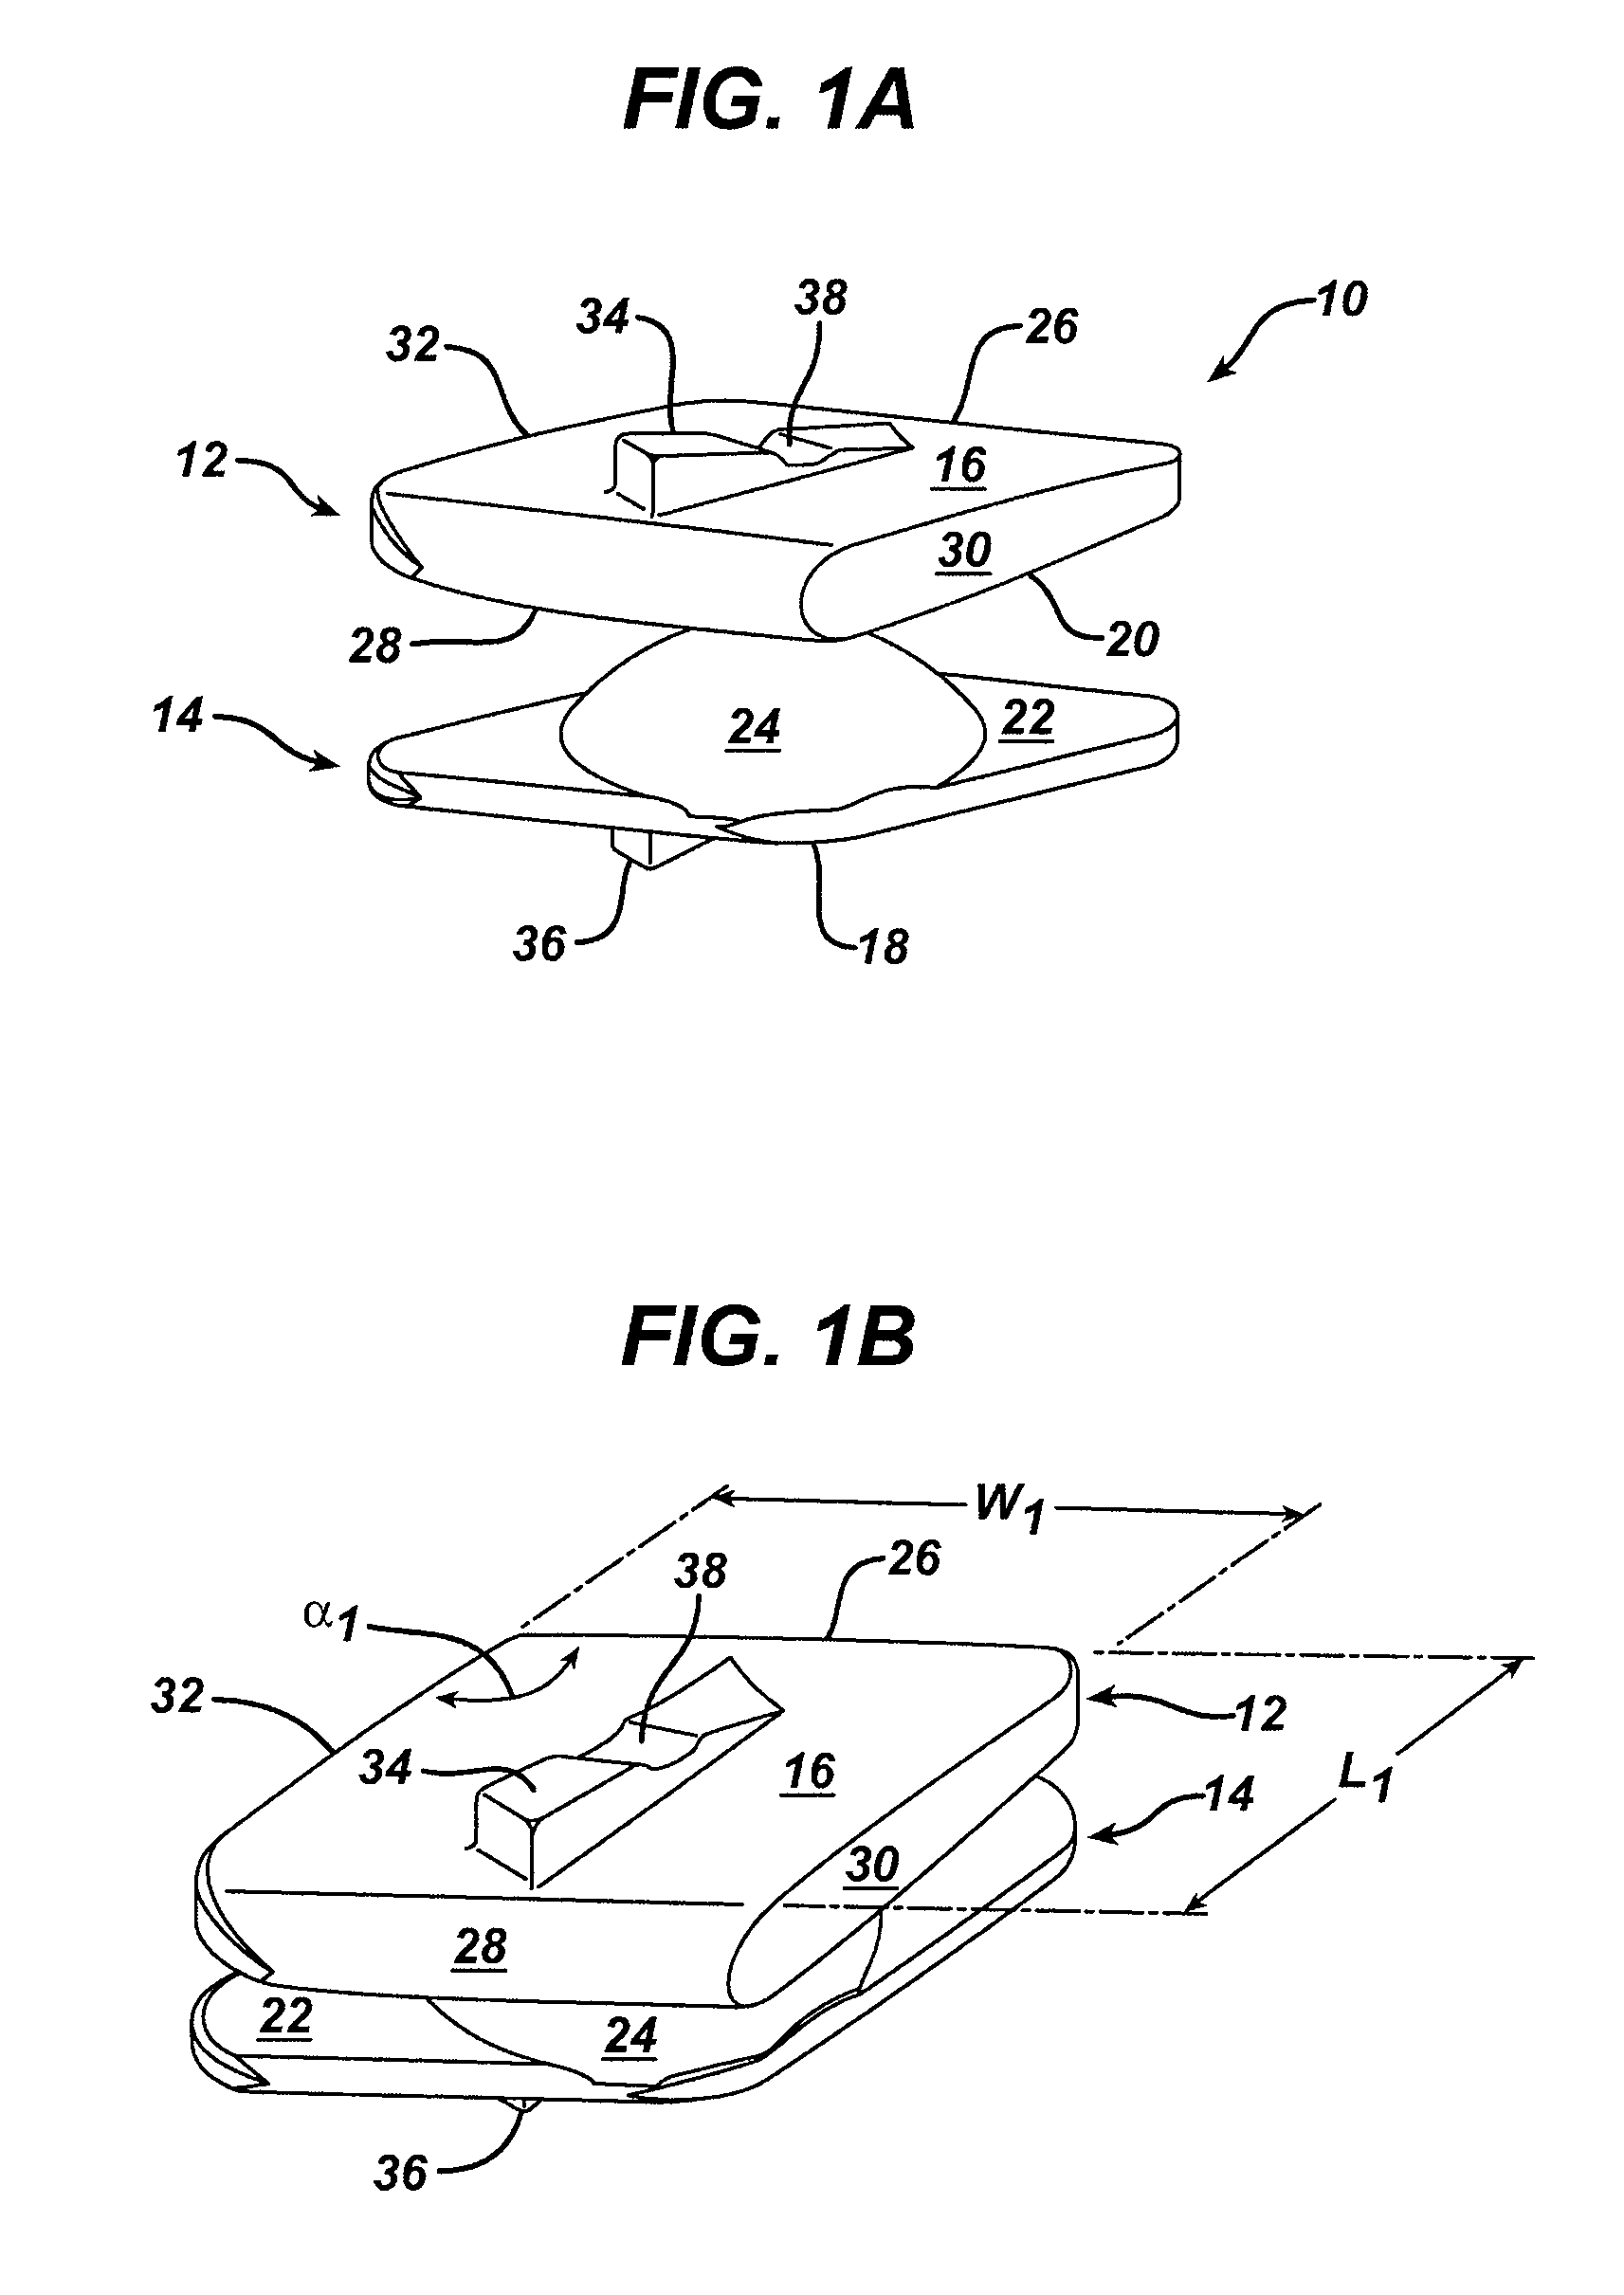 Methods and instrumentation for disc replacement